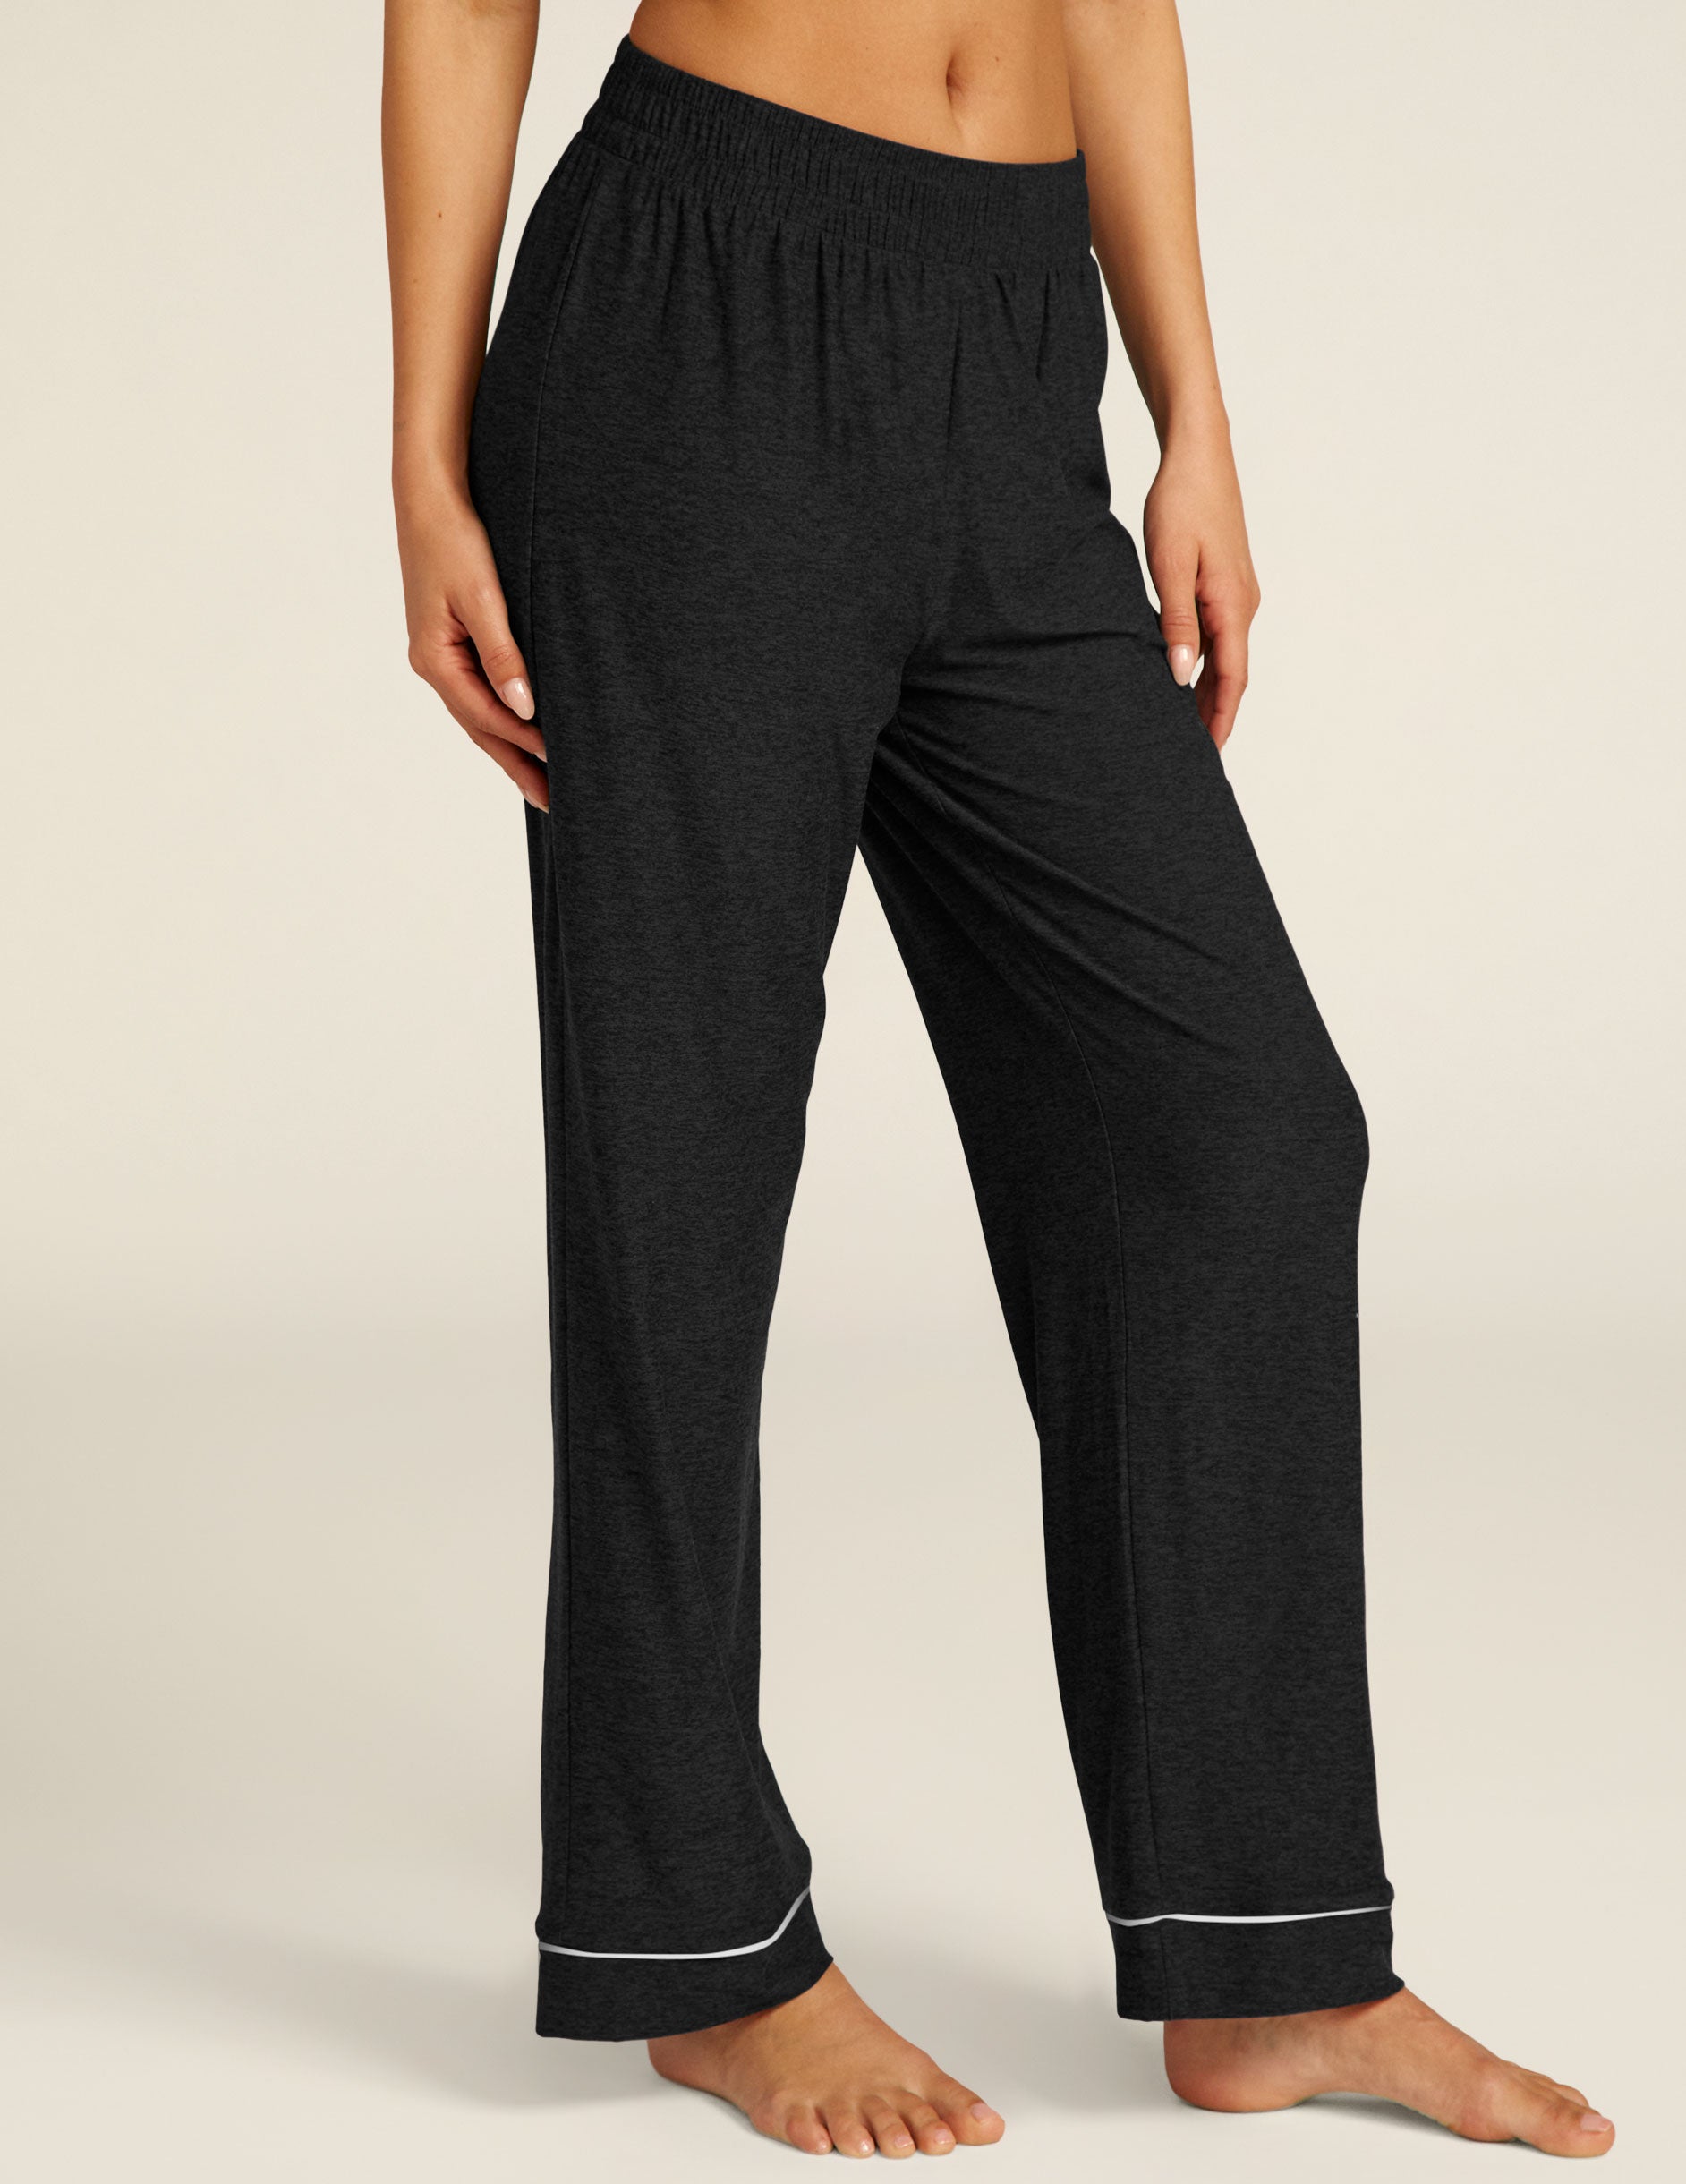 black sleep pants with white piping at ankles. 